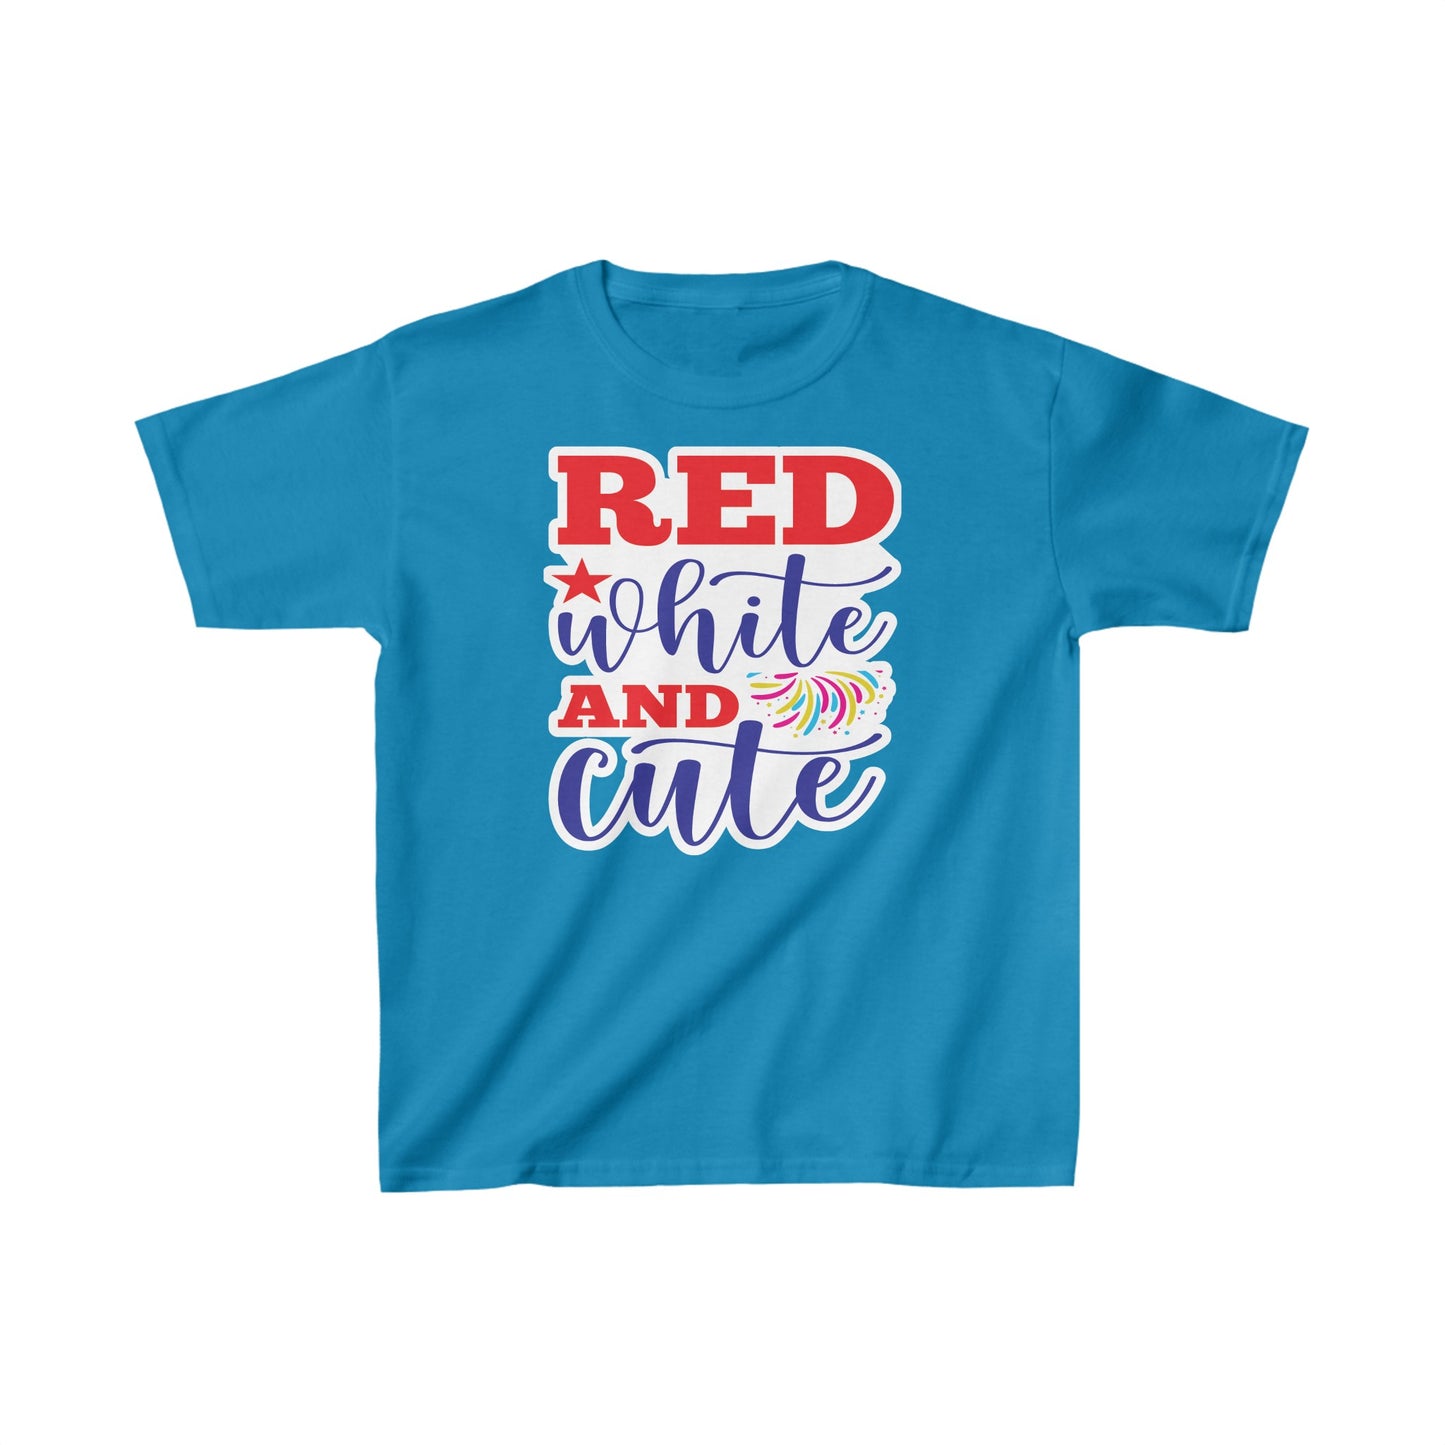 Get trendy with Red White and Cute Kids Heavy Cotton™ Tee - Kids clothes available at Good Gift Company. Grab yours for $10.78 today!